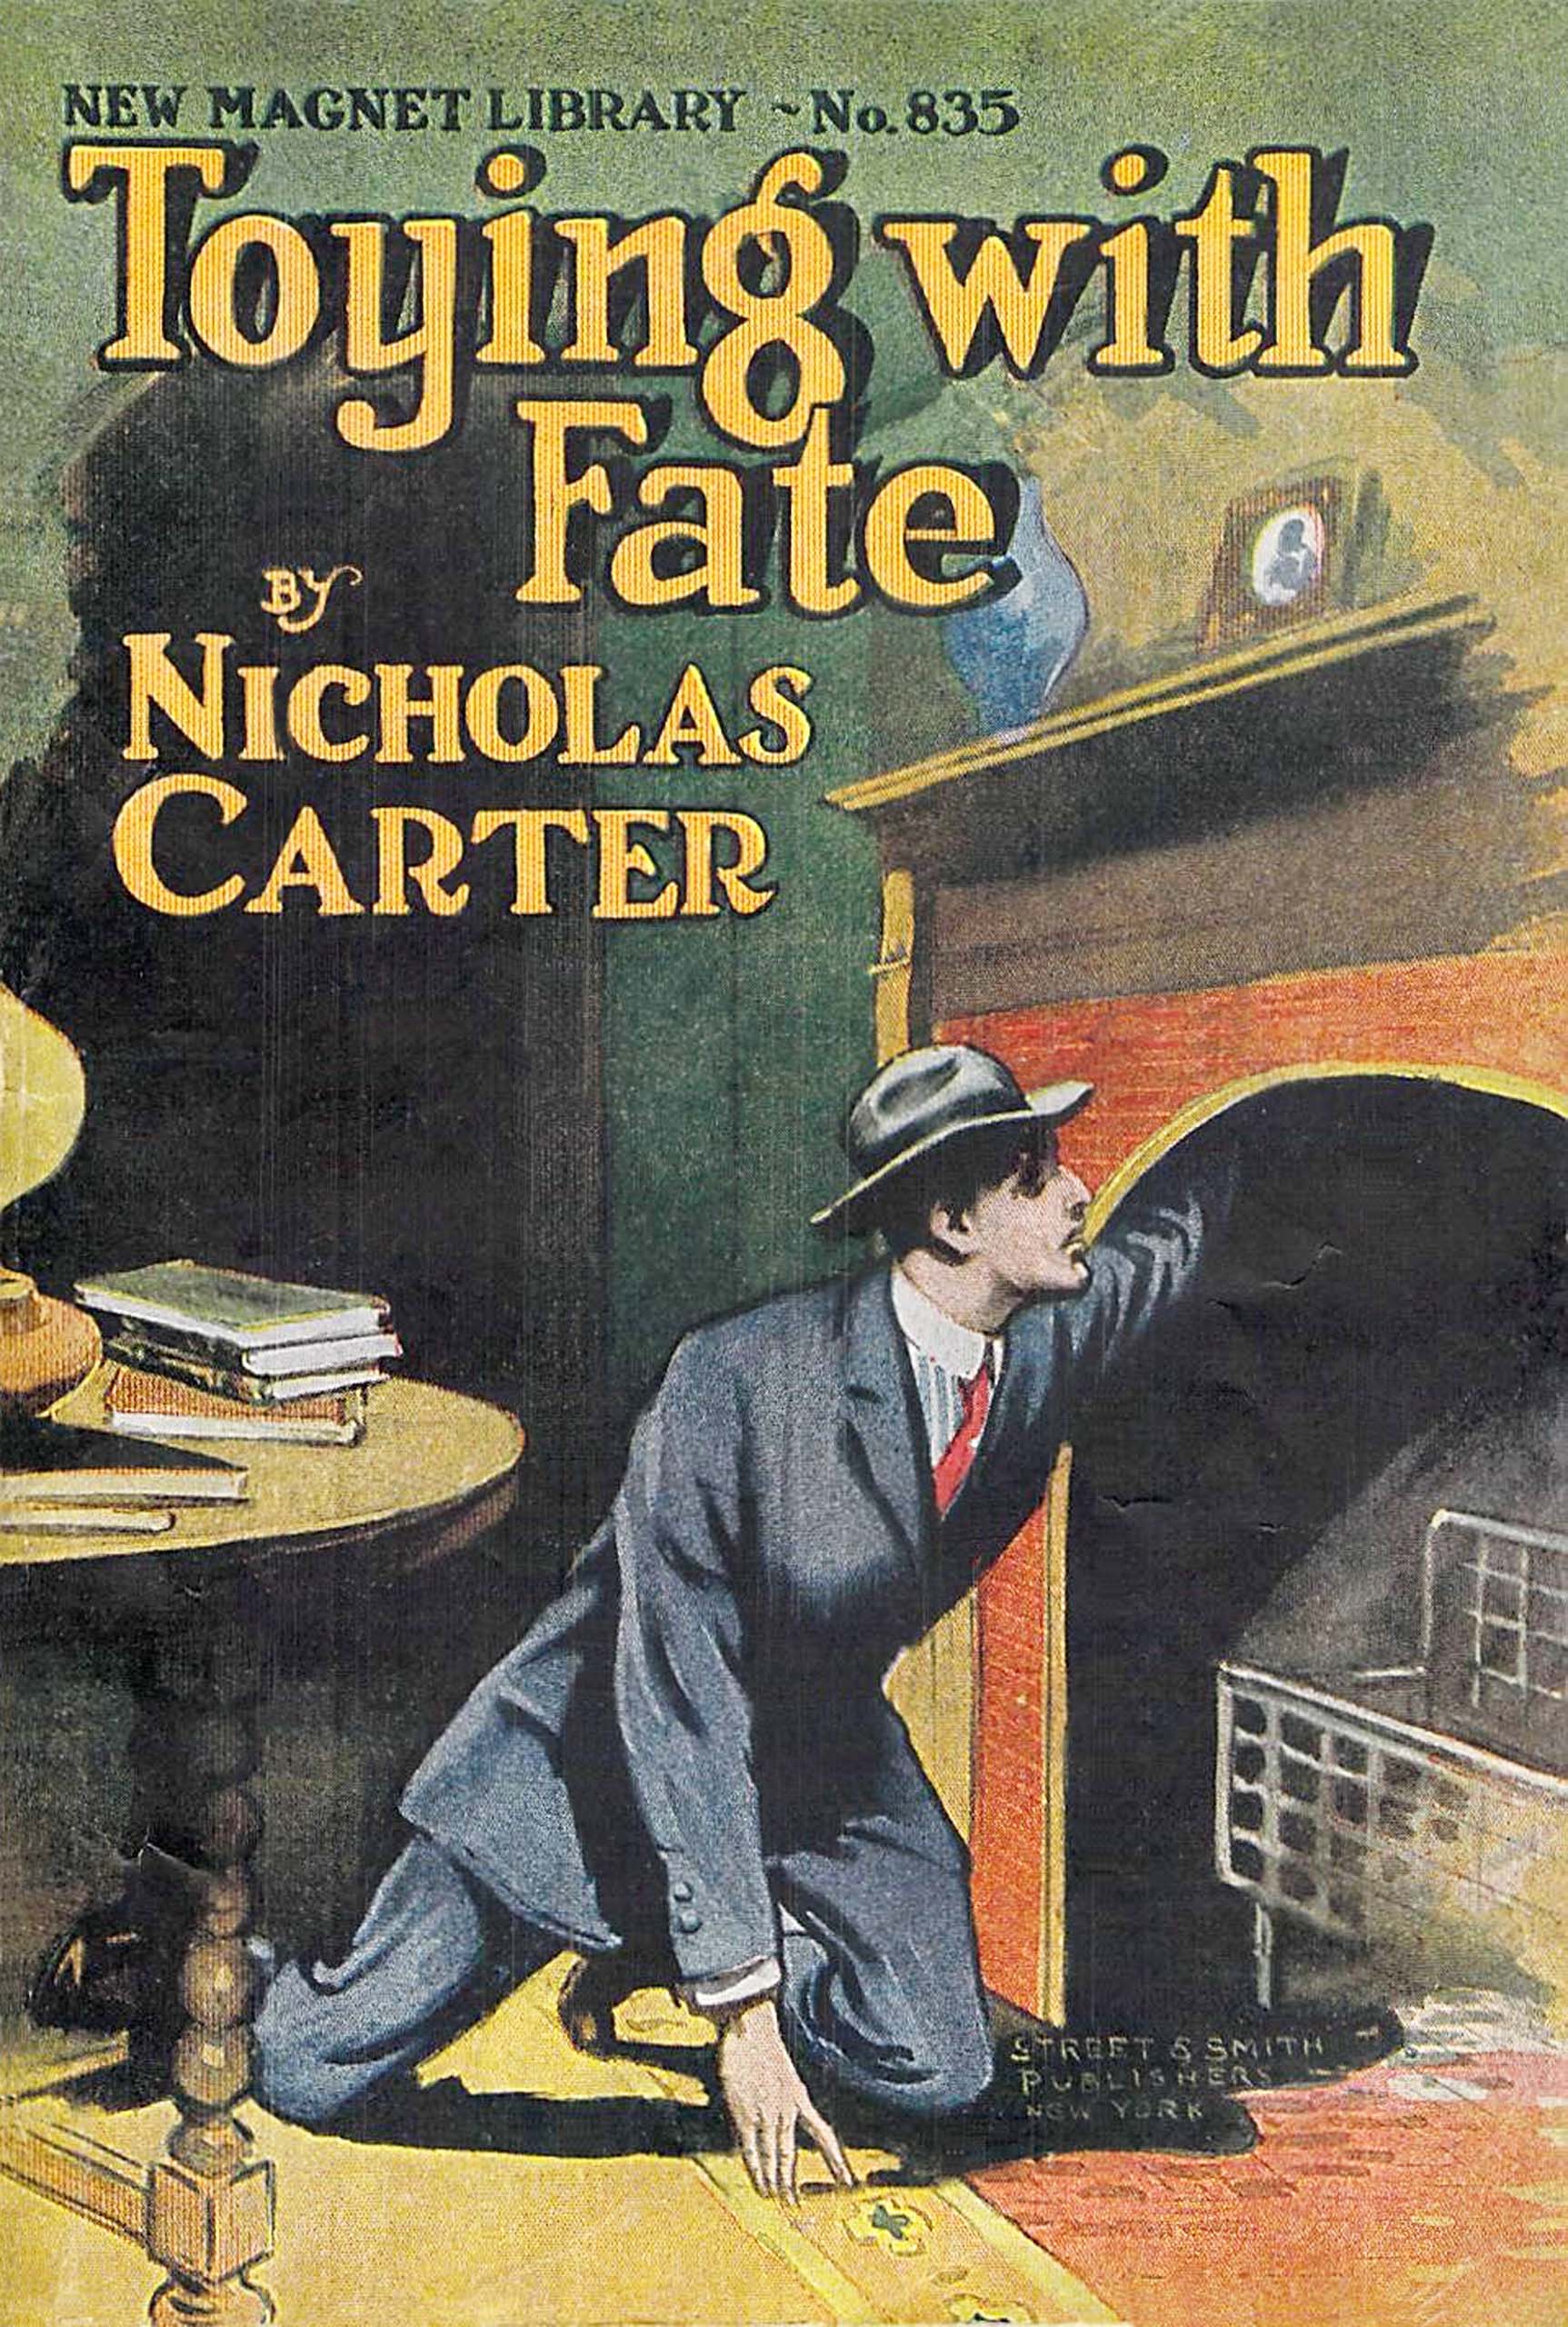 Toying with fate; or Nick Carters narrow shave, by Nicholas Carter—A Project Gutenberg eBook